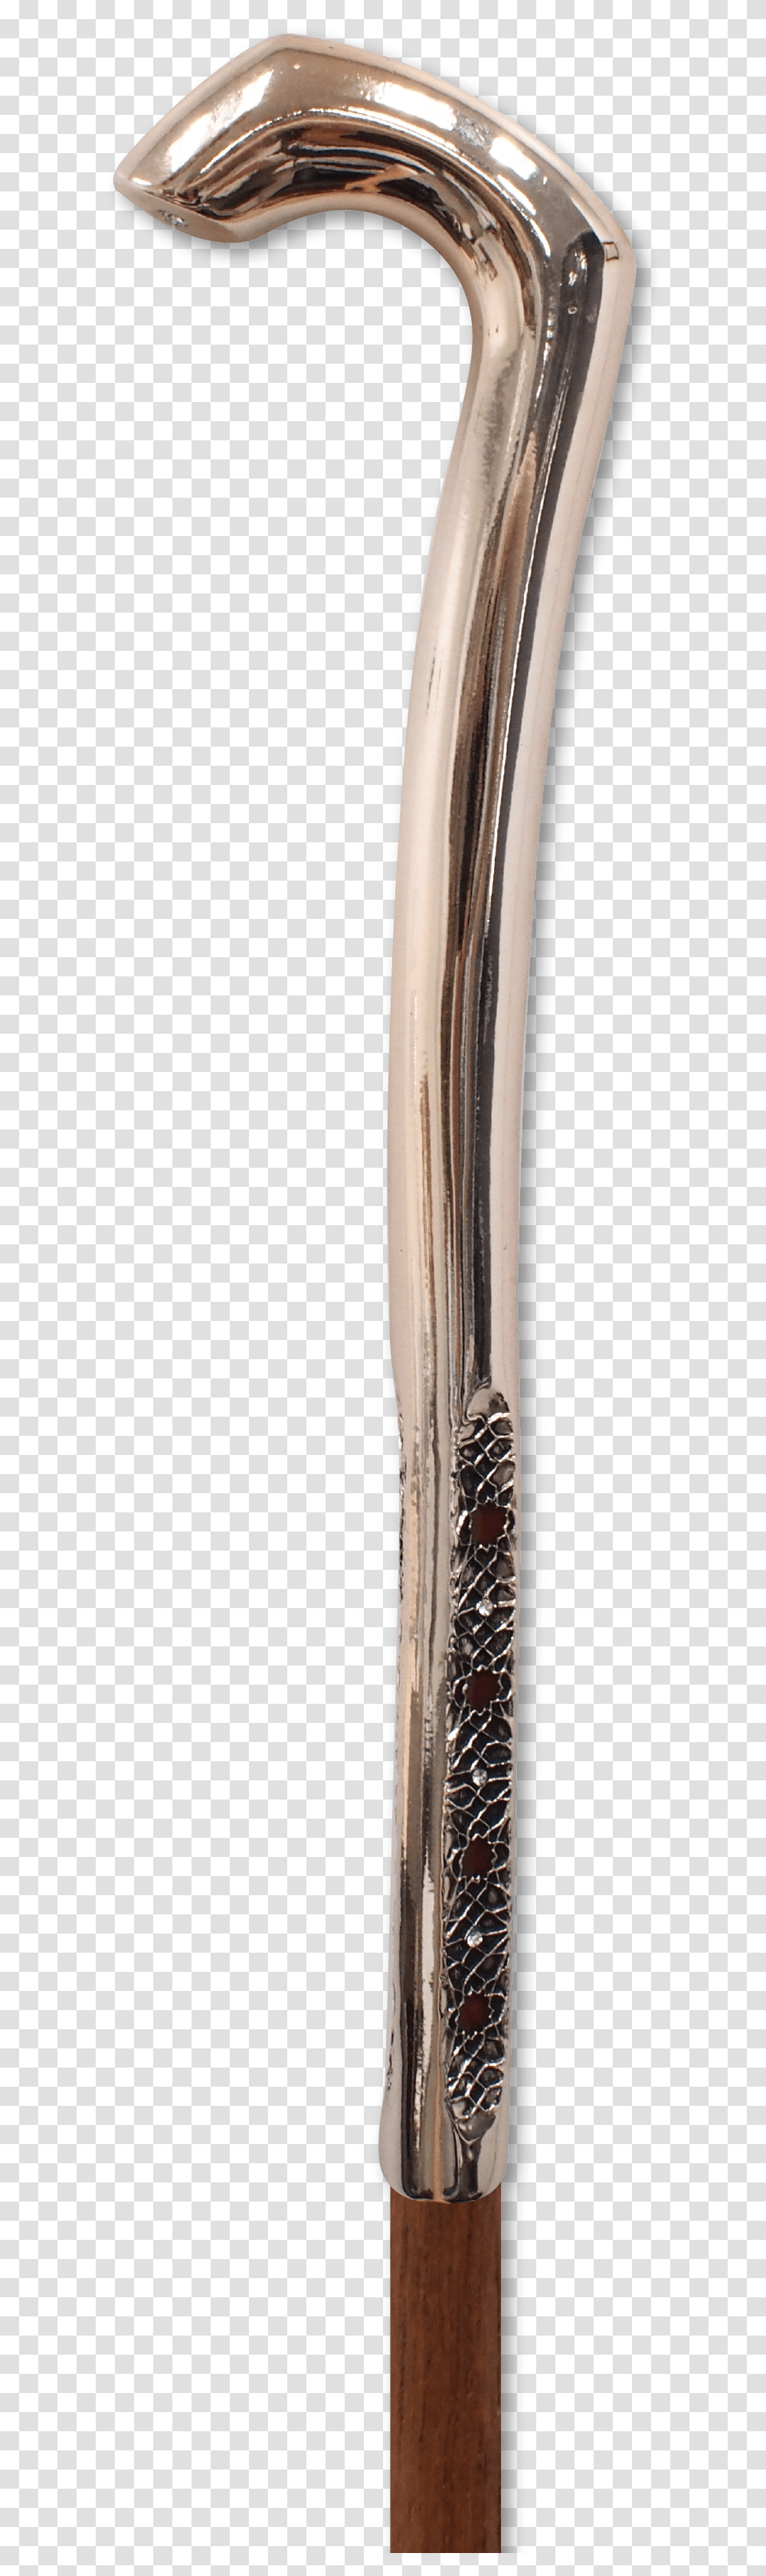 Walking Stick Iron, Blade, Weapon, Weaponry, Team Sport Transparent Png